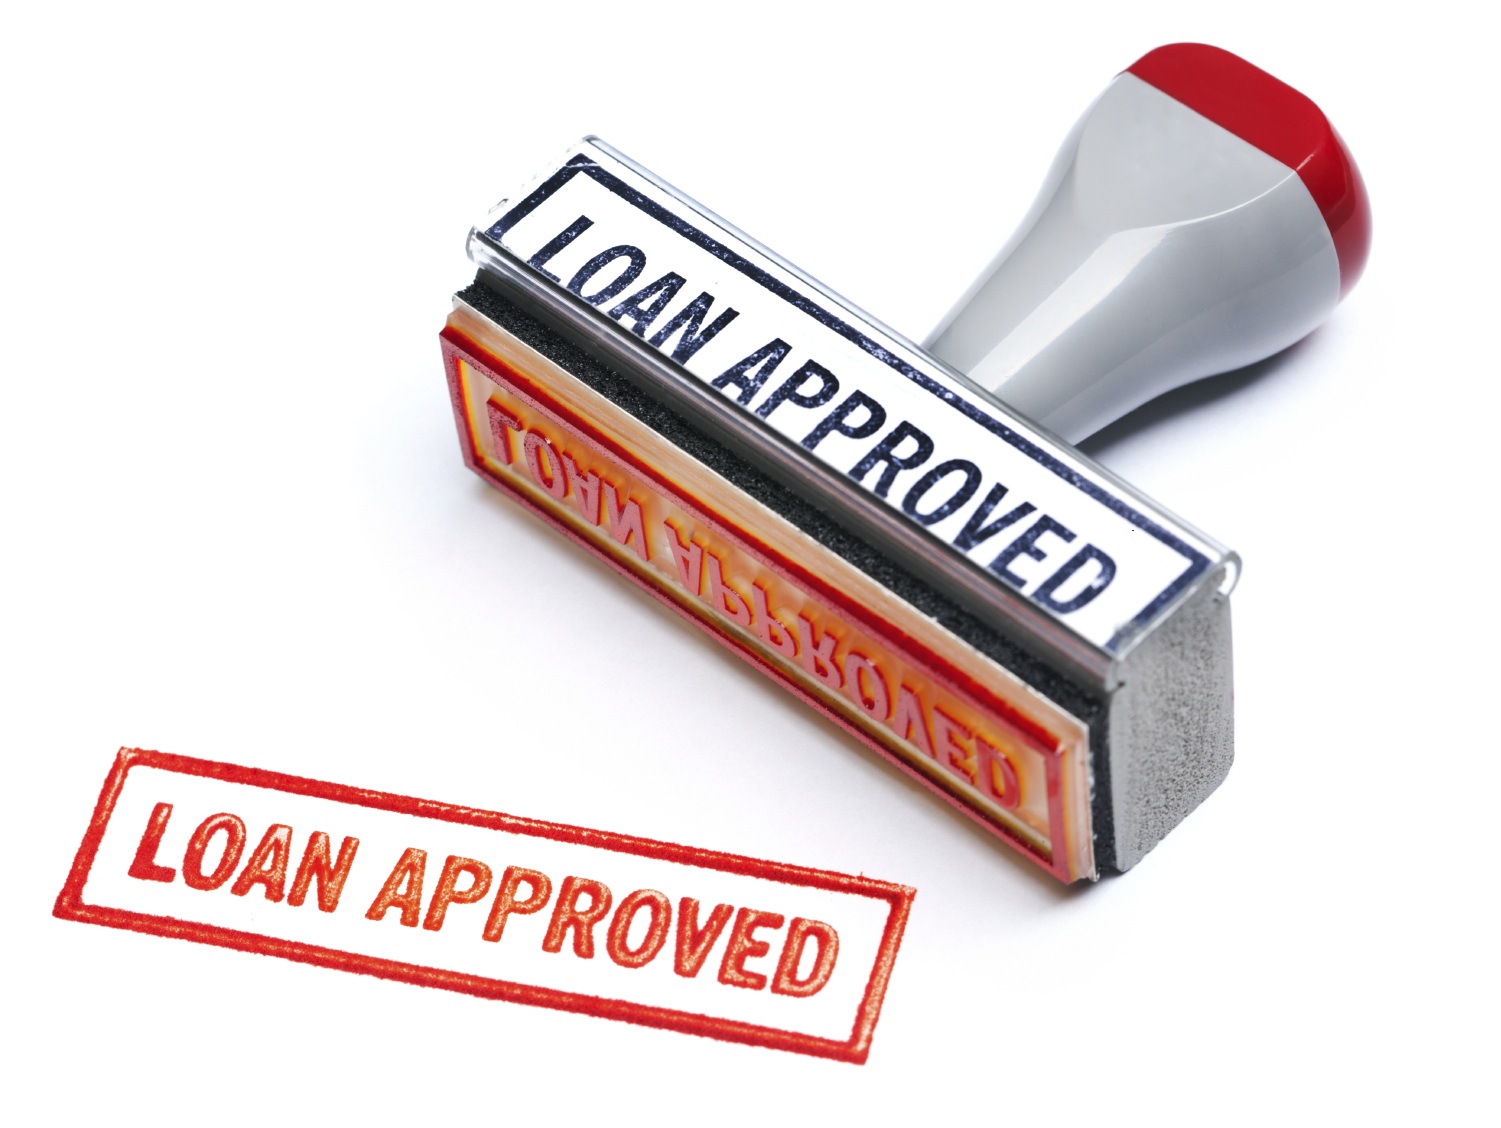 LOAN APROBED